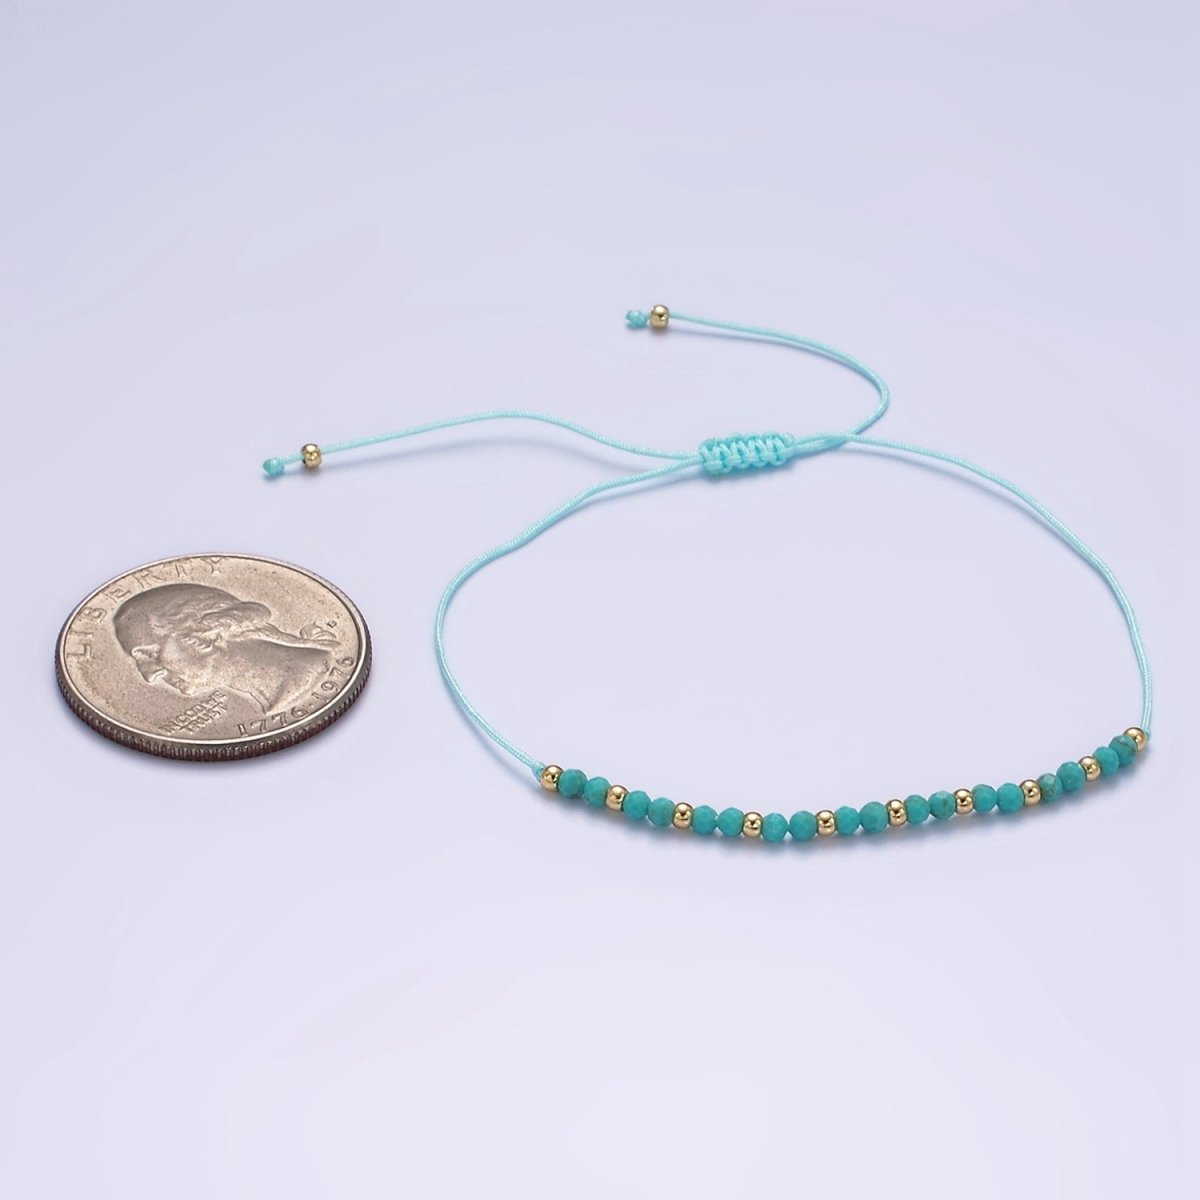 14K Gold Filled Turquoise Multifaceted Turquoise Rope Adjustable Friendship Bracelet | WA-2181 - WA-2183 Clearance Pricing - DLUXCA